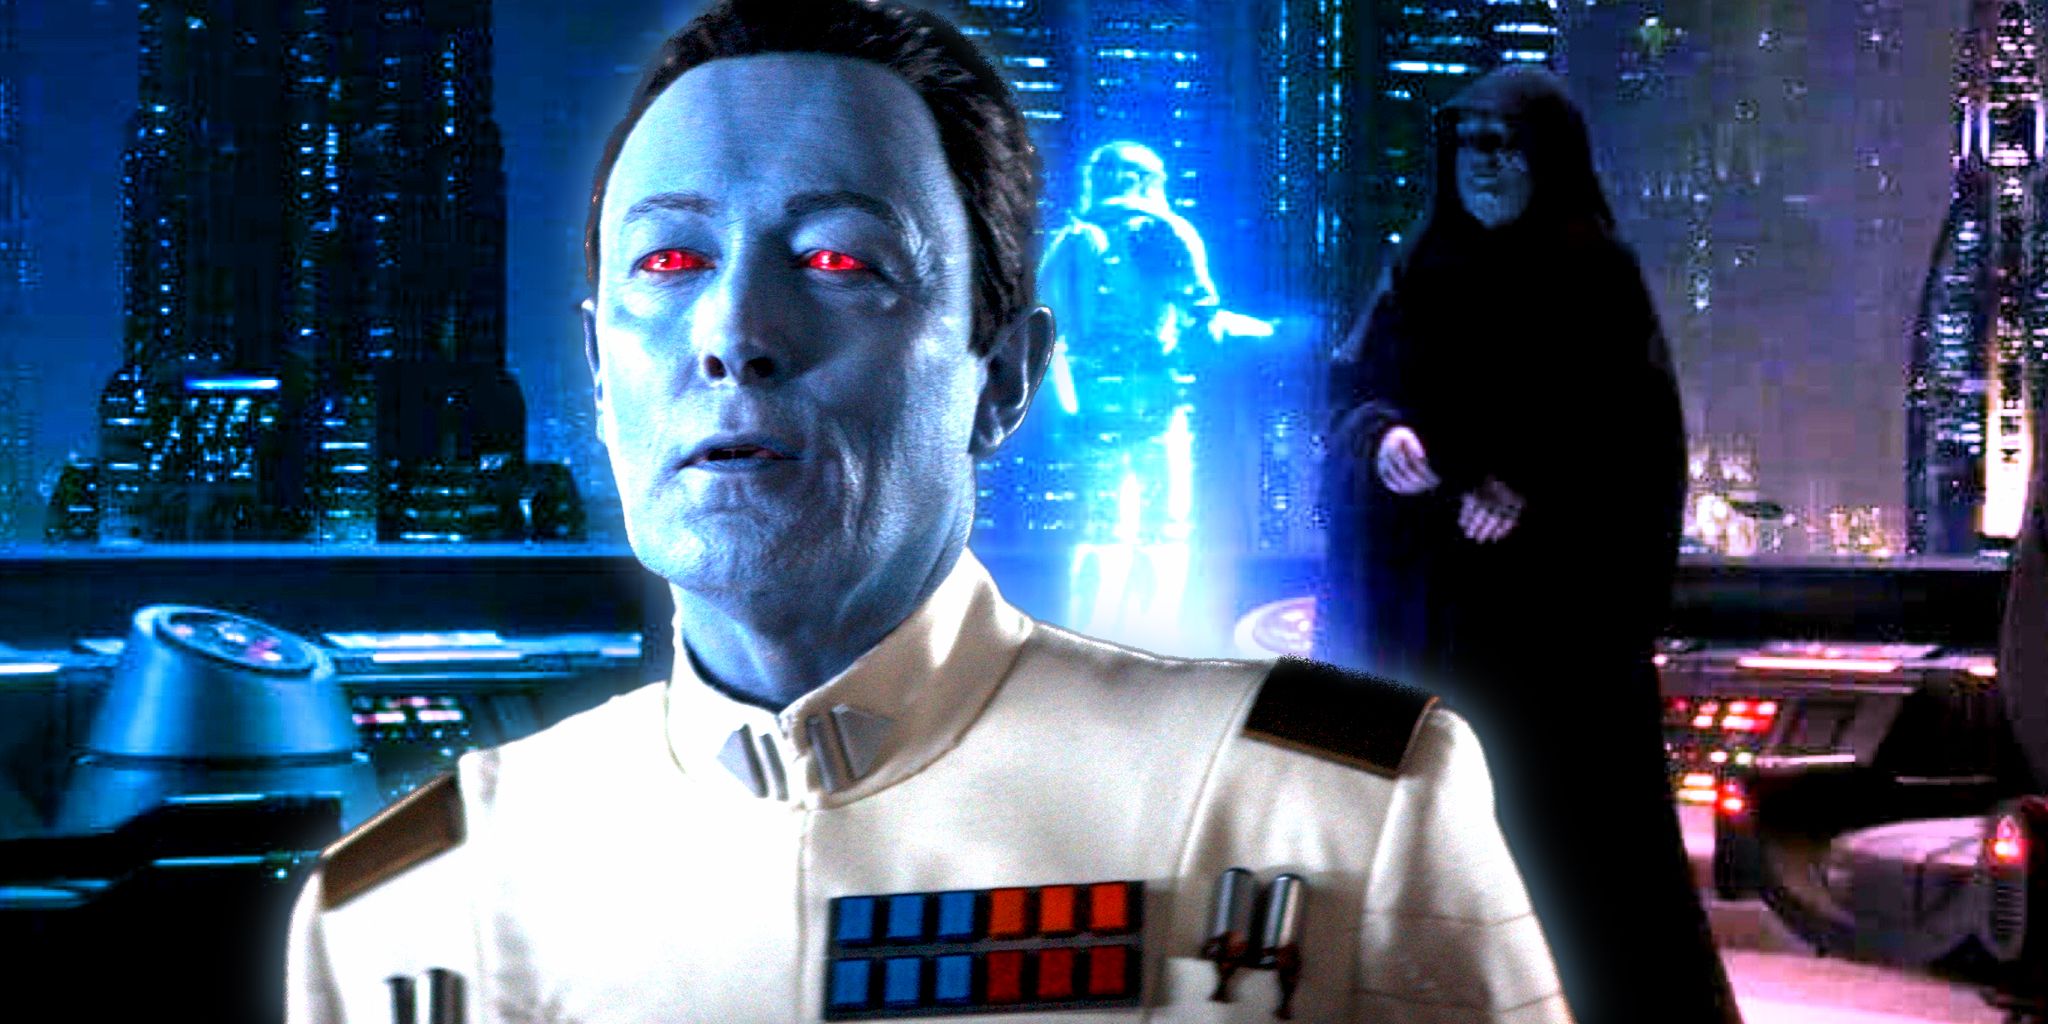 Grand Admiral Thrawn in the foreground, Palpatine telling Cody to execute Order 66 in the background